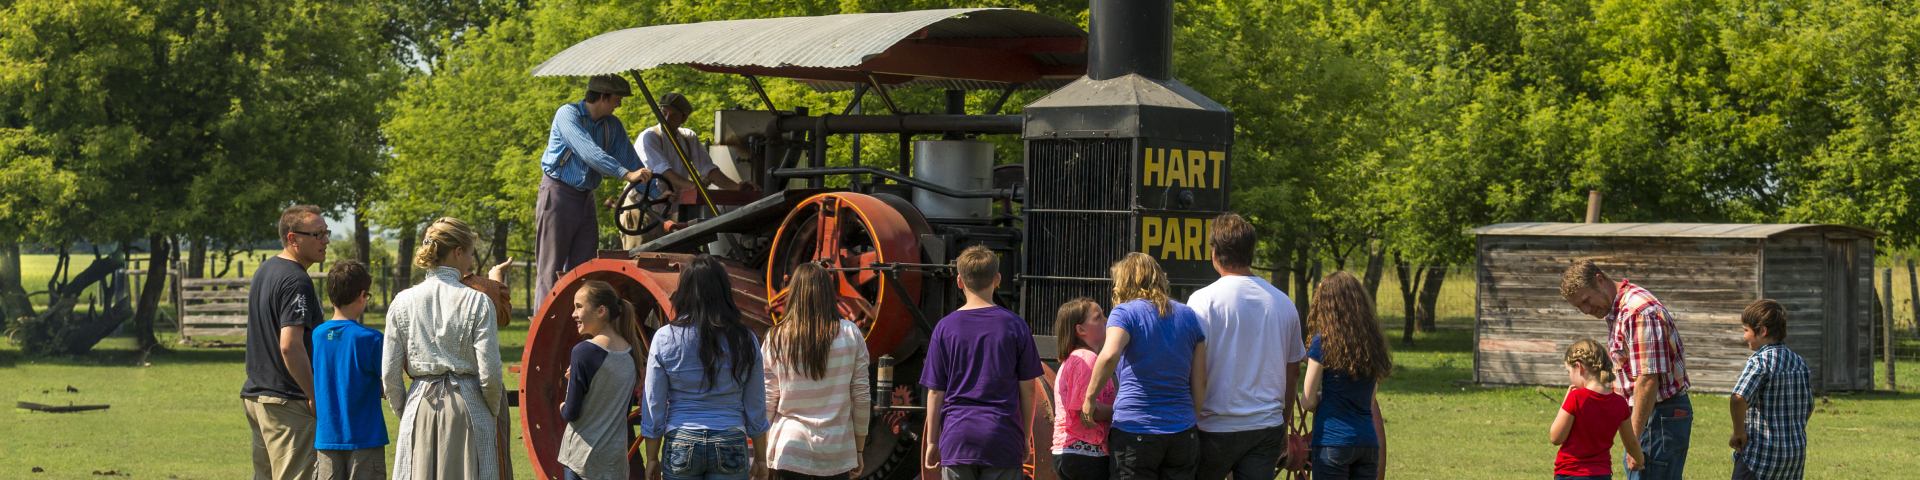 Visitors getting a demonstration from costumed interpreters, of the Hart Parr tractor at Motherwell Homestead